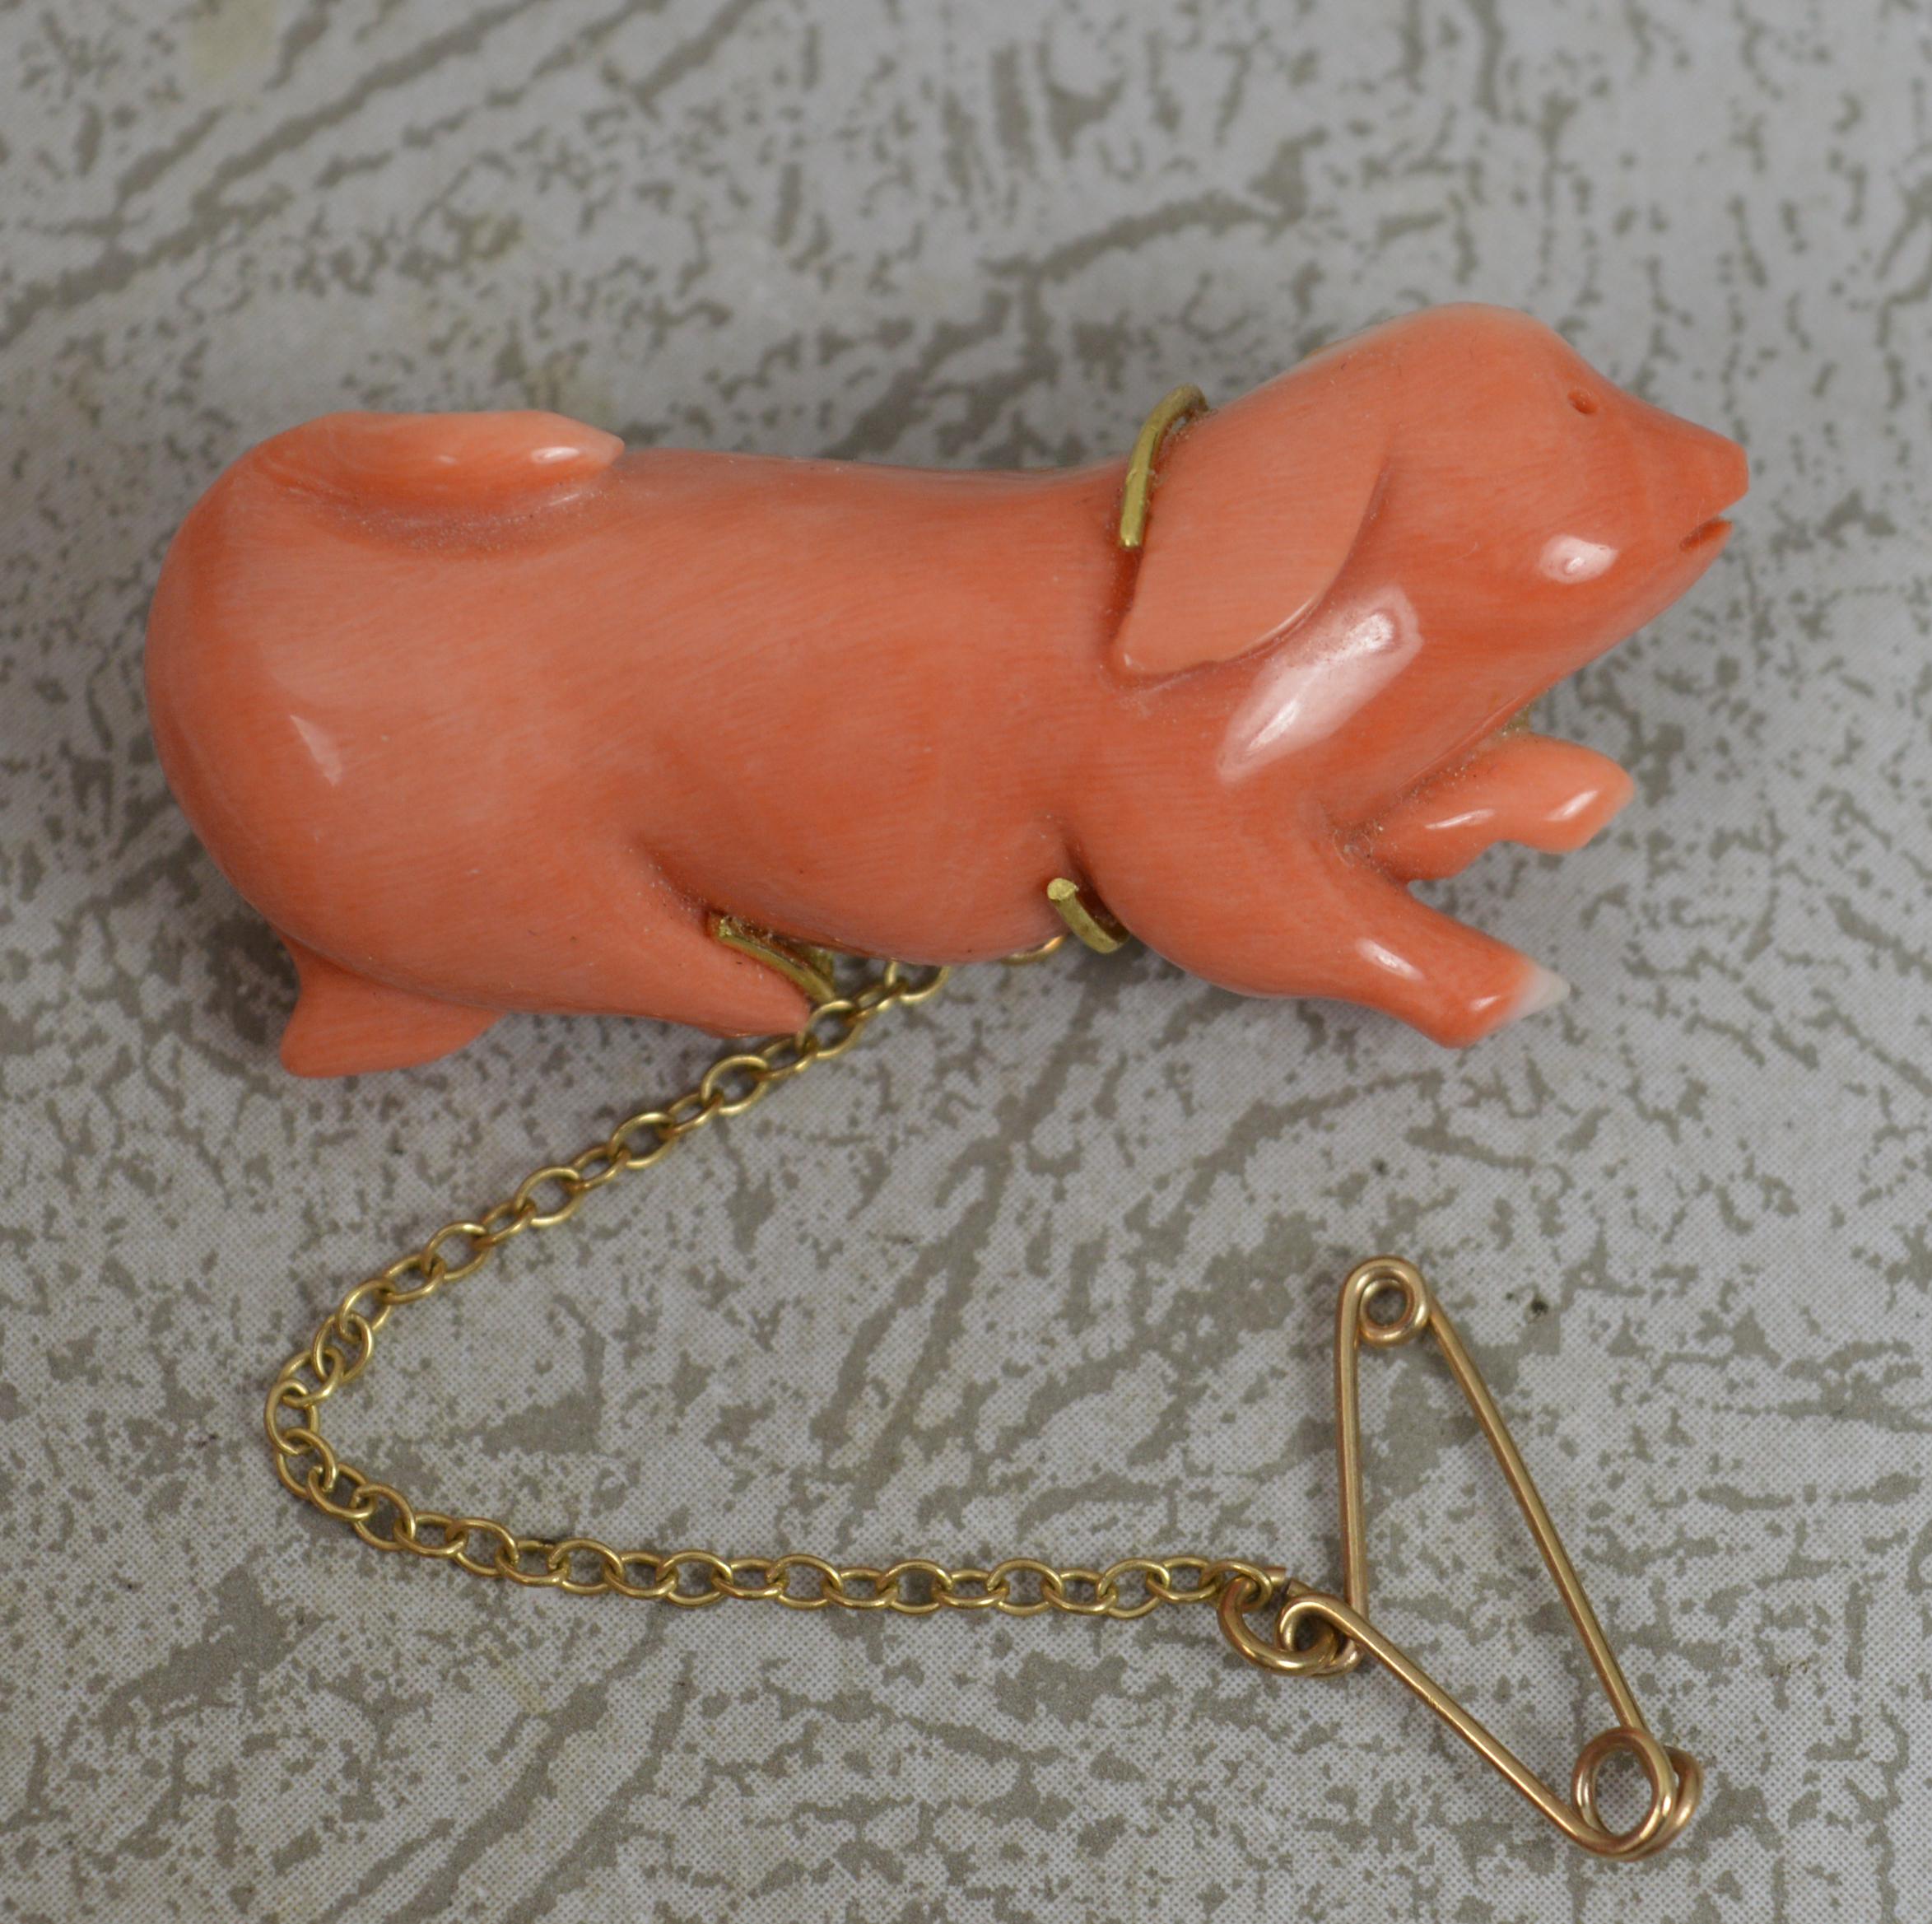 A superb vintage brooch.
A finely carved piece in the form of a pig.
Mounted into a solid 18 carat yellow gold claw setting and back.

CONDITION ; Excellent. Crisp pattern., finely carved. Clean back and setting. Working pin. Please view